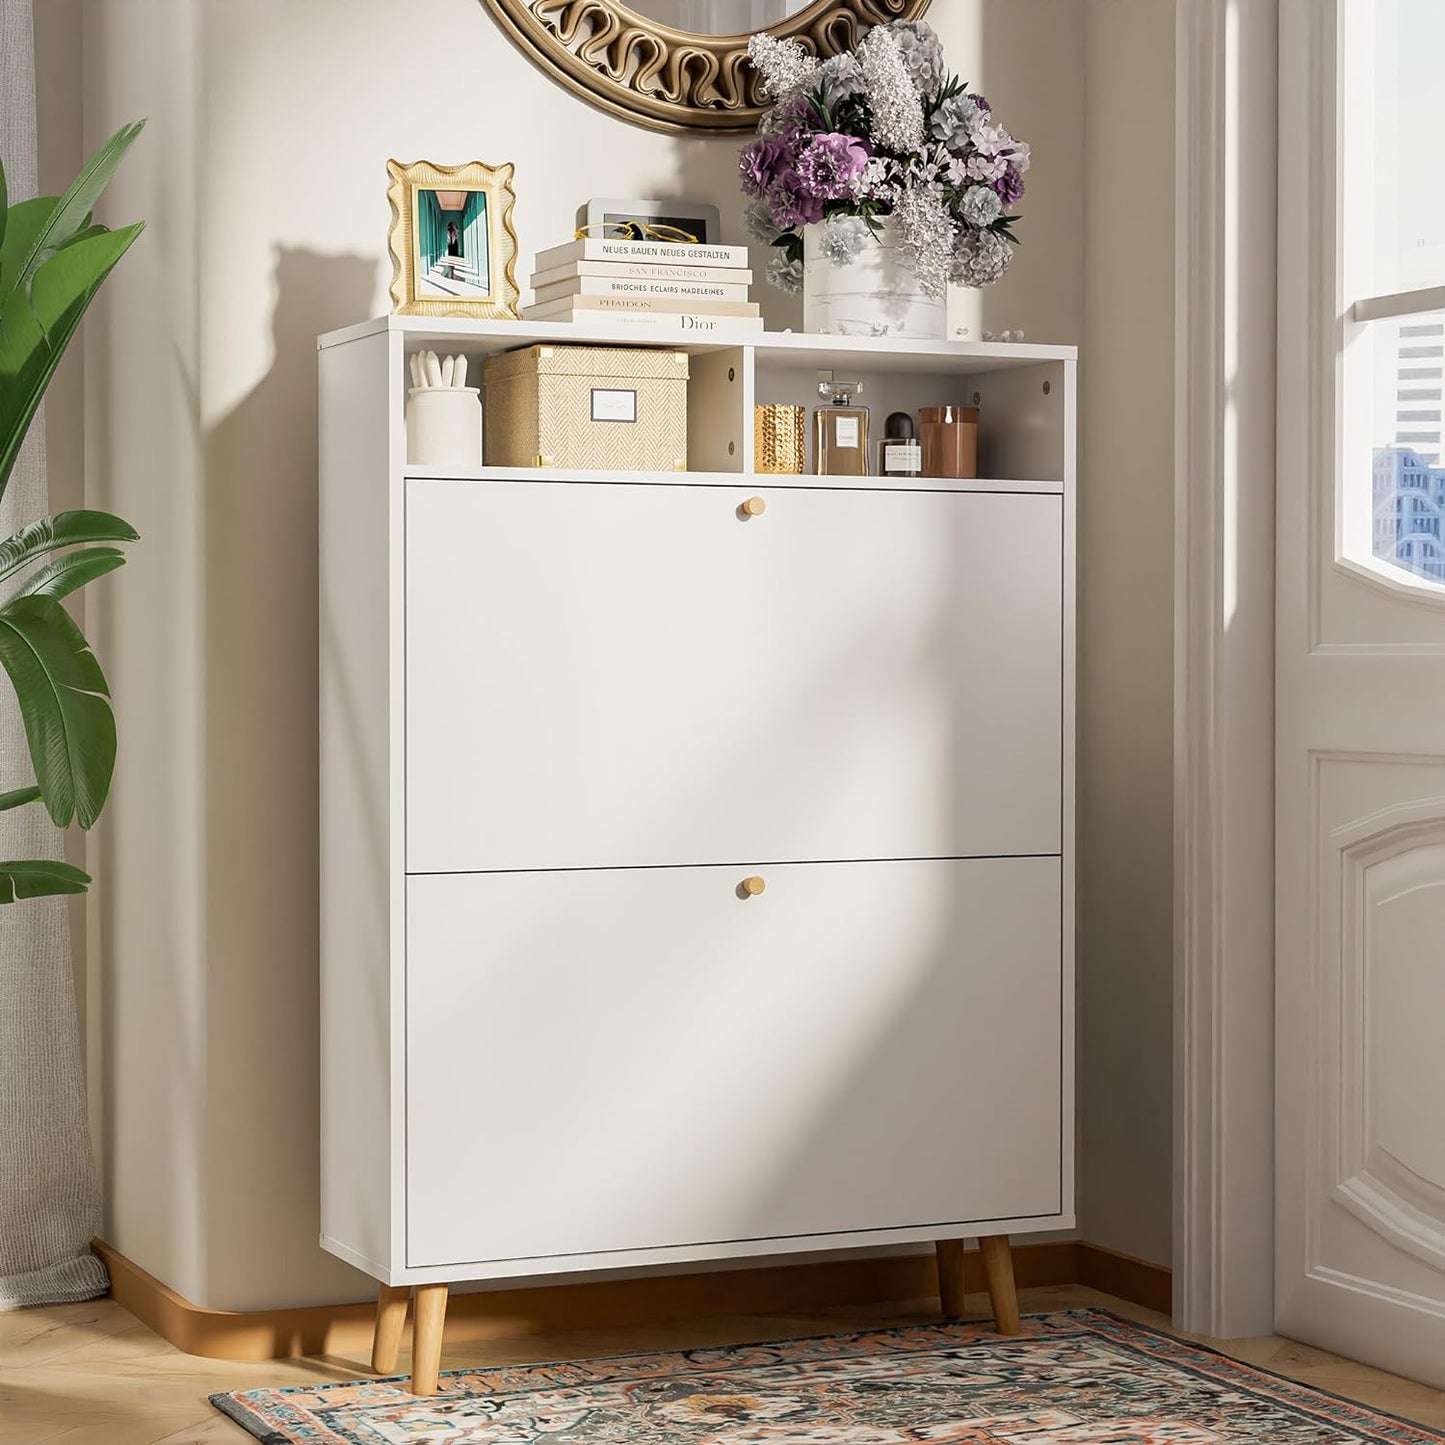 Shoe Cabinet with 2 Flip Drawers